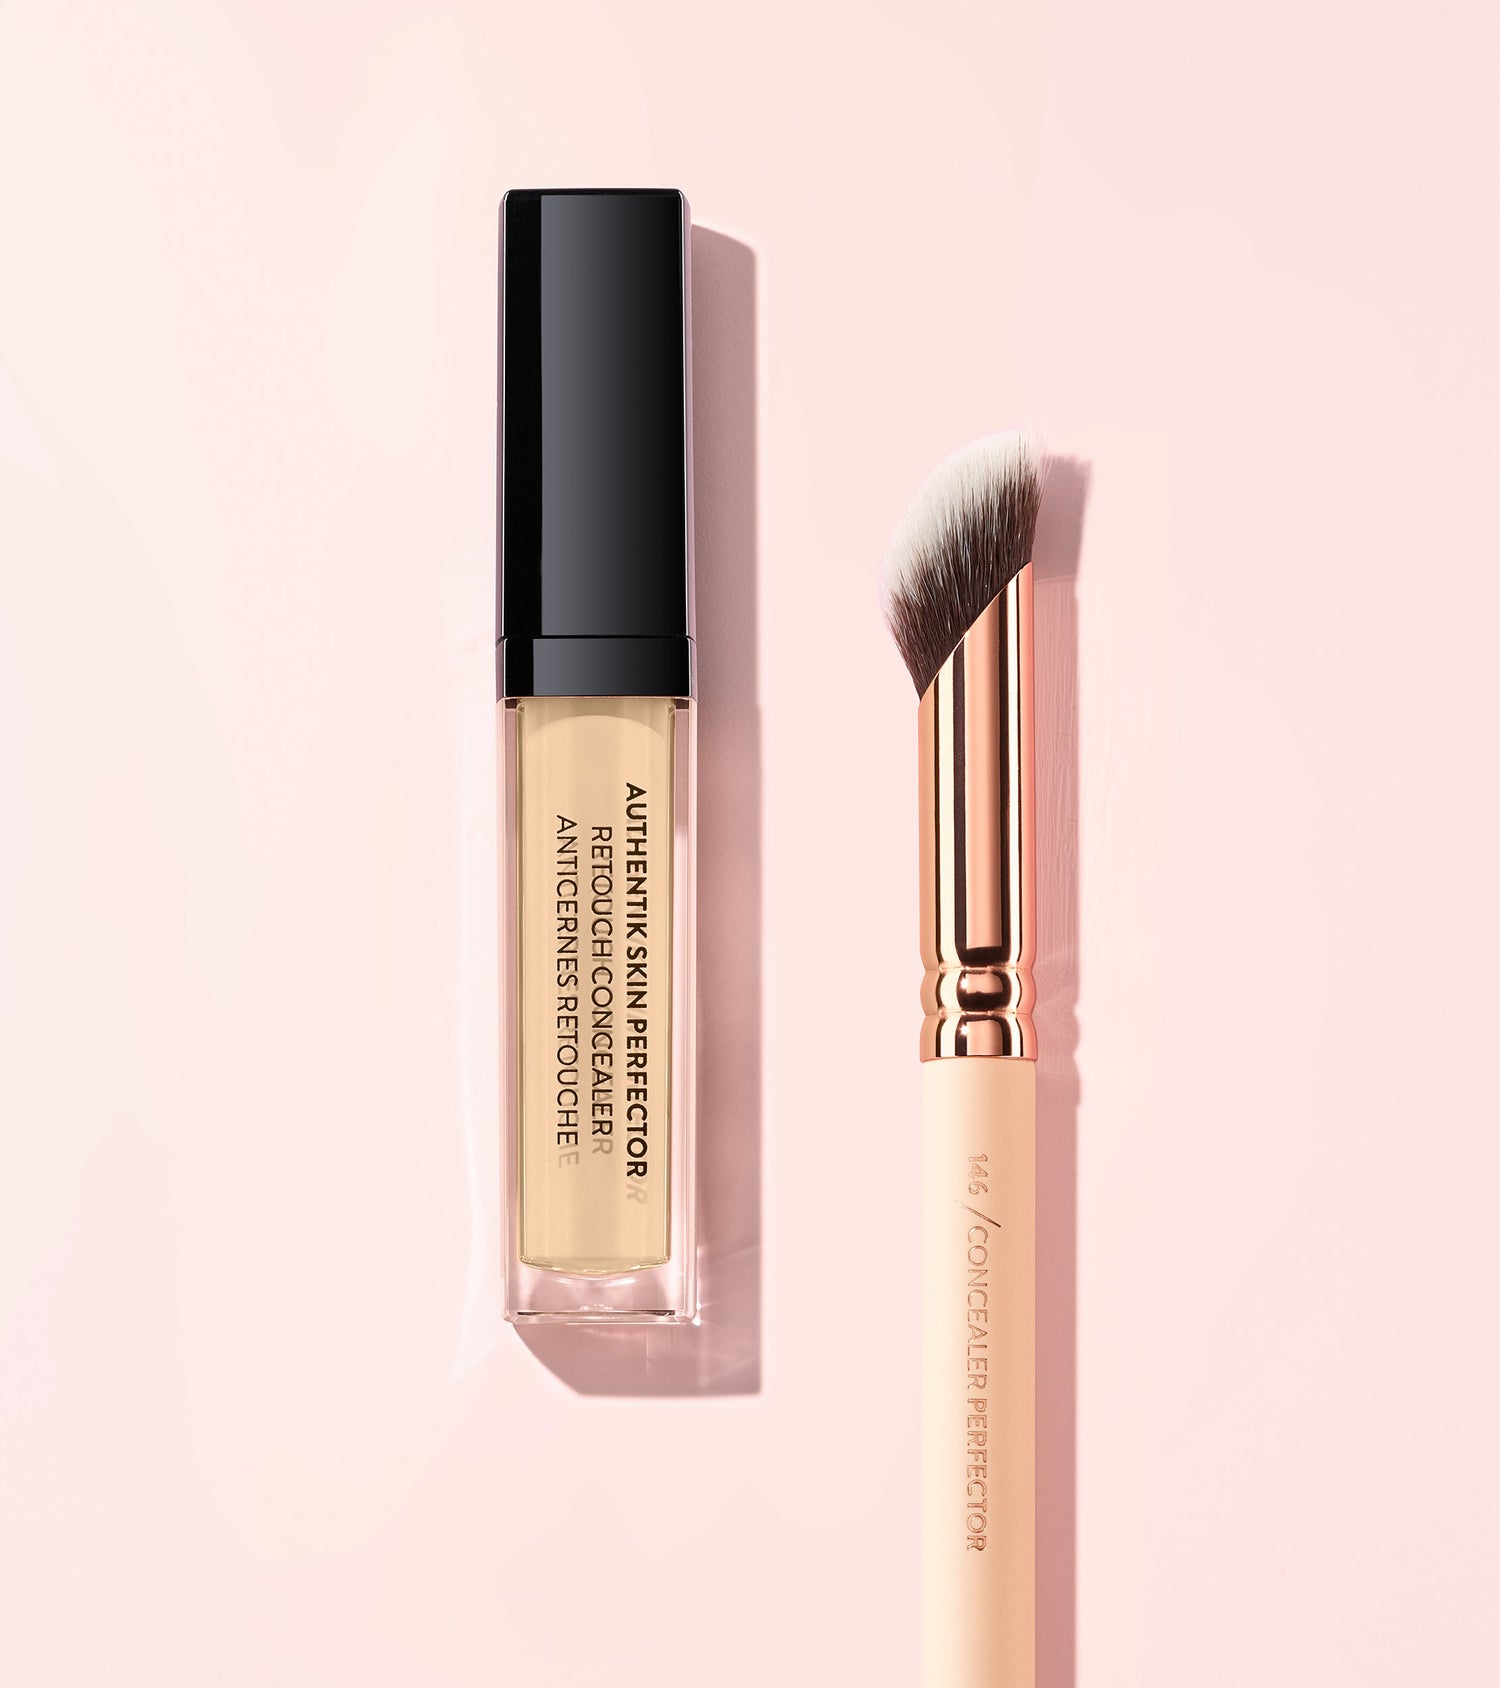 AUTHENTIK SKIN PERFECTOR CONCEALER (070 CREDITABLE) Main Image featured